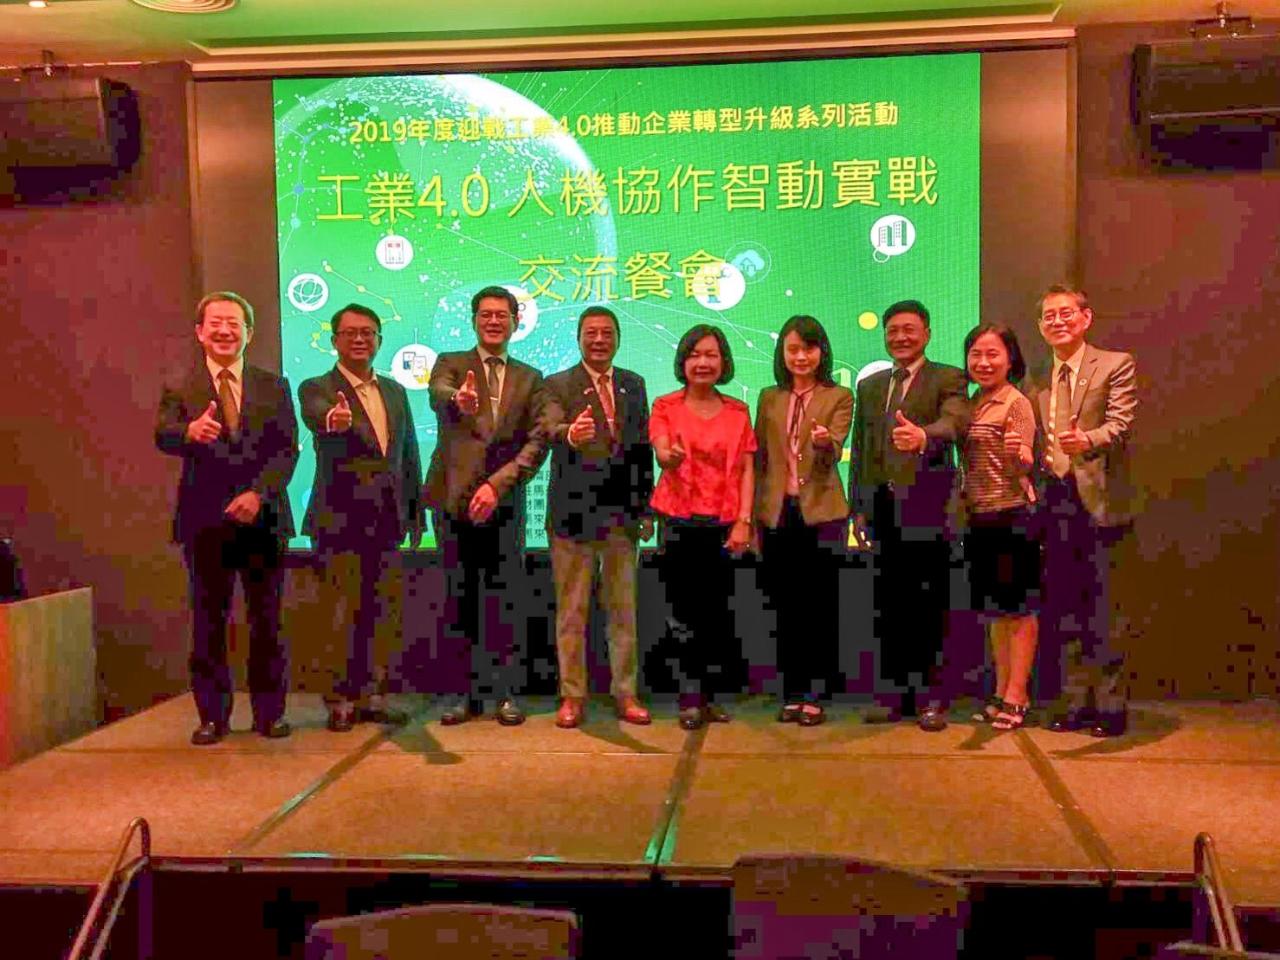 Representative Anne Hung (5th from right) attends the Networking Dinner of “Industrial 4.0~Human-Robot Collaboration Seminar”.
